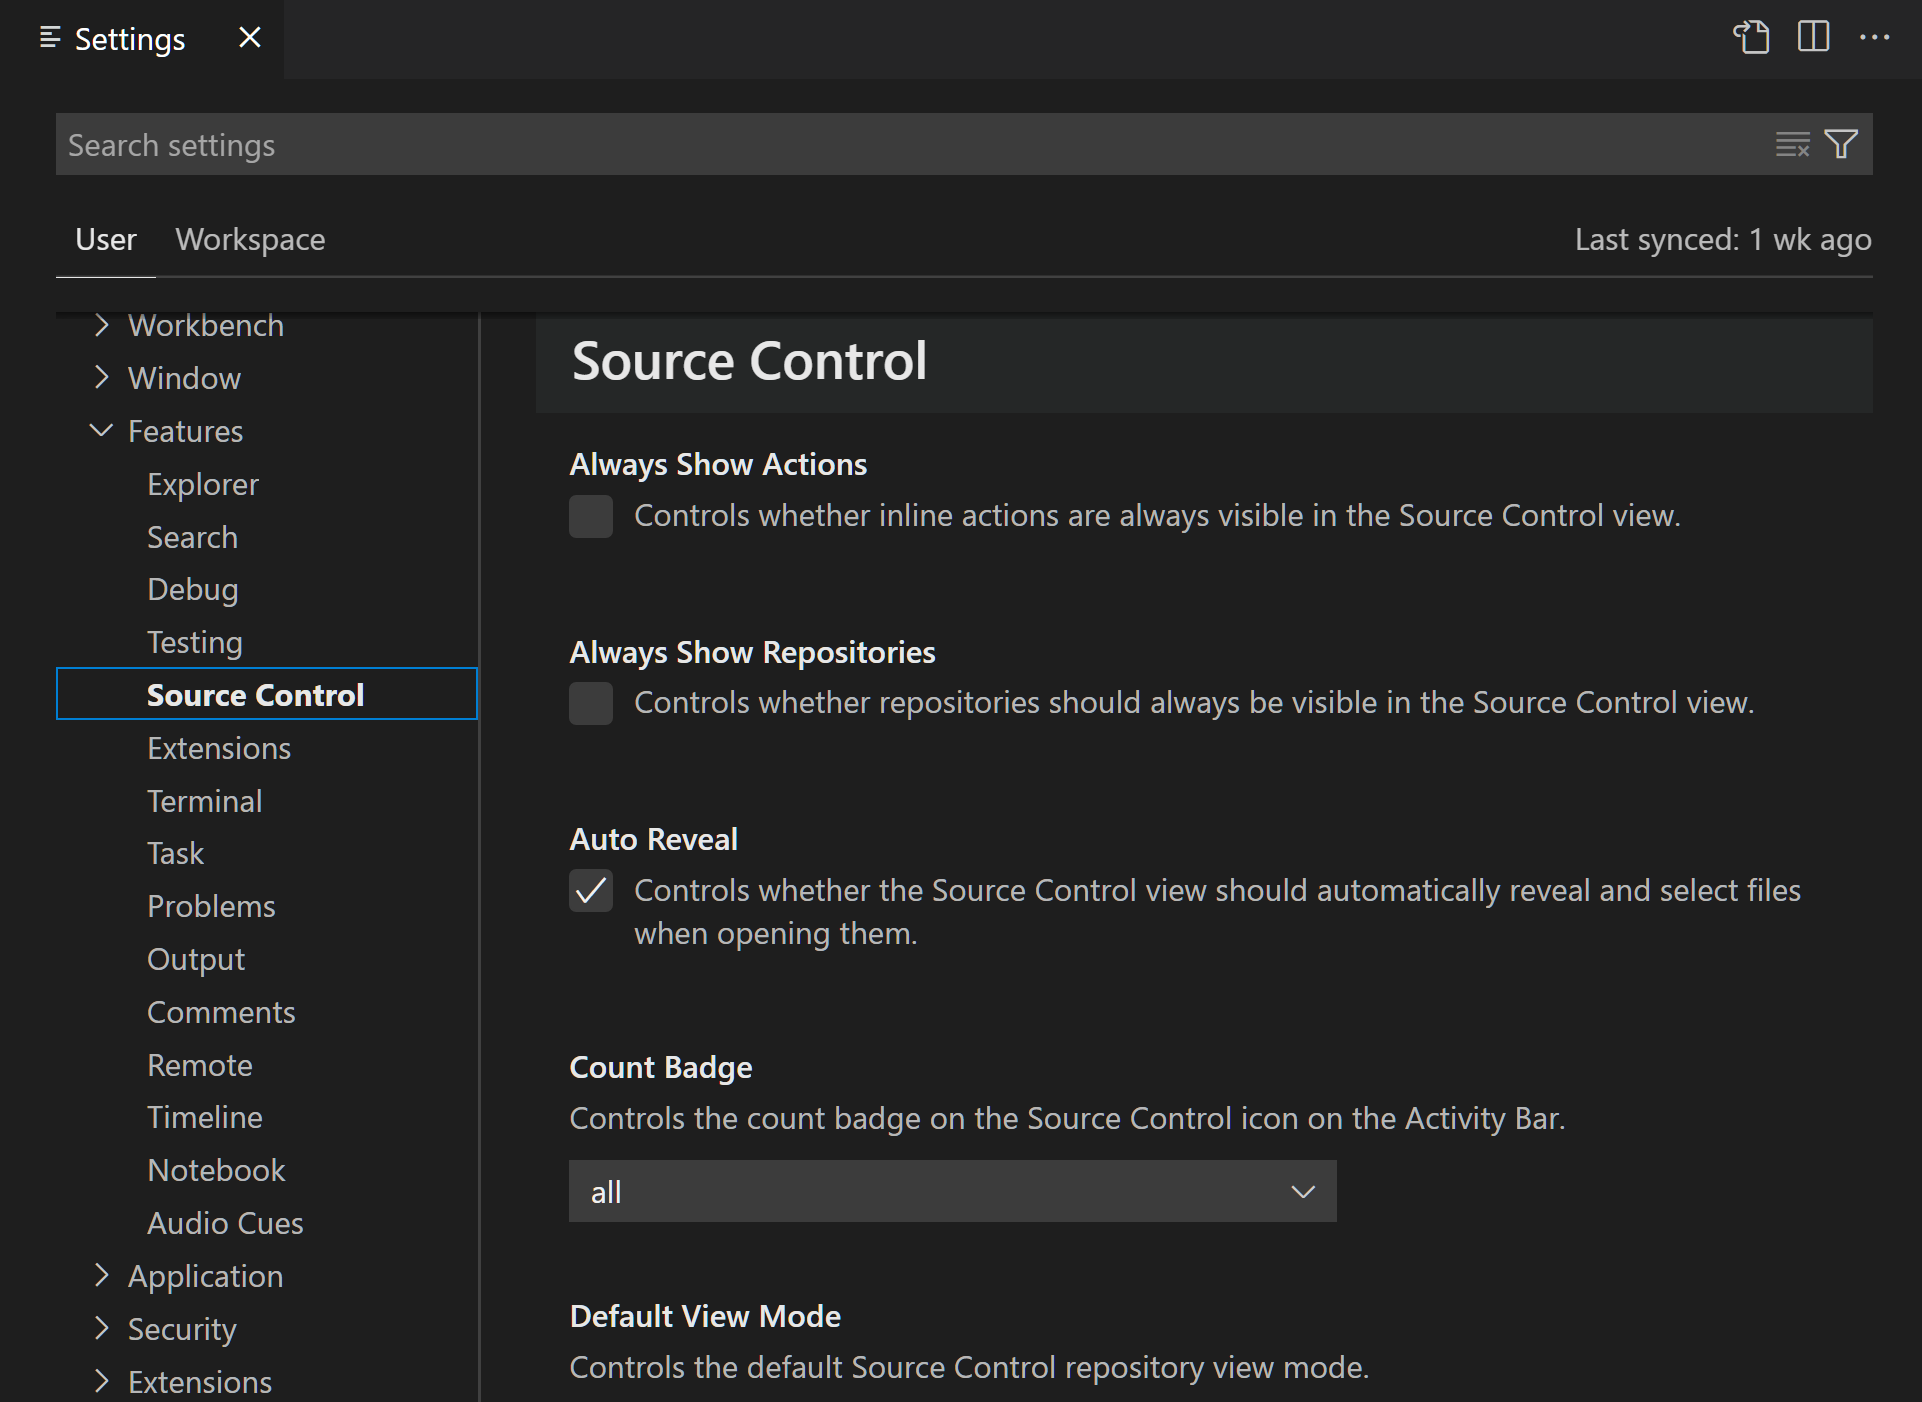 Settings editor with the Source Control section of the table of contents selected